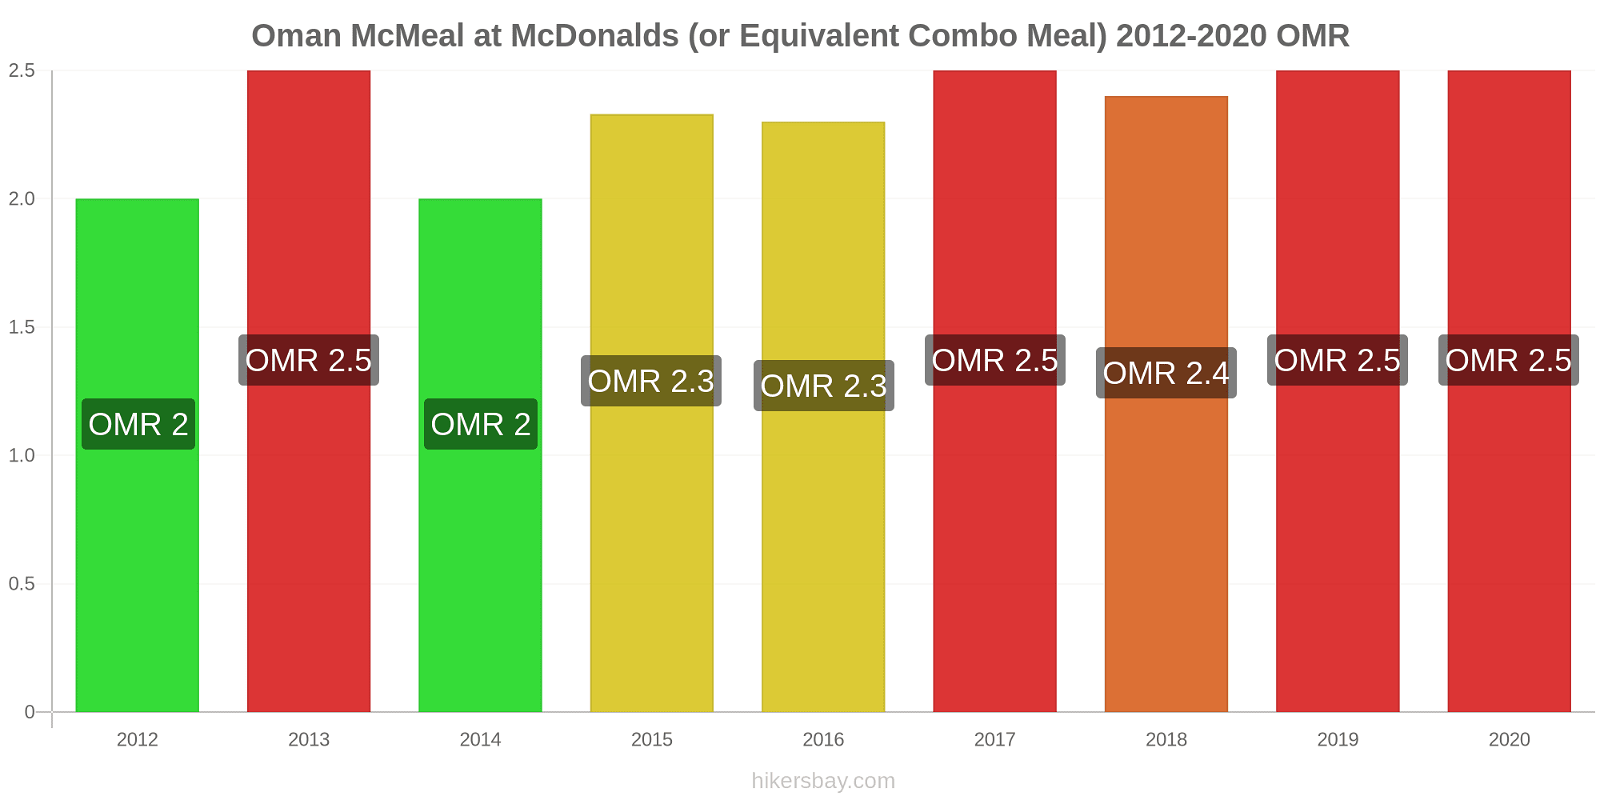 Oman price changes McMeal at McDonalds (or Equivalent Combo Meal) hikersbay.com